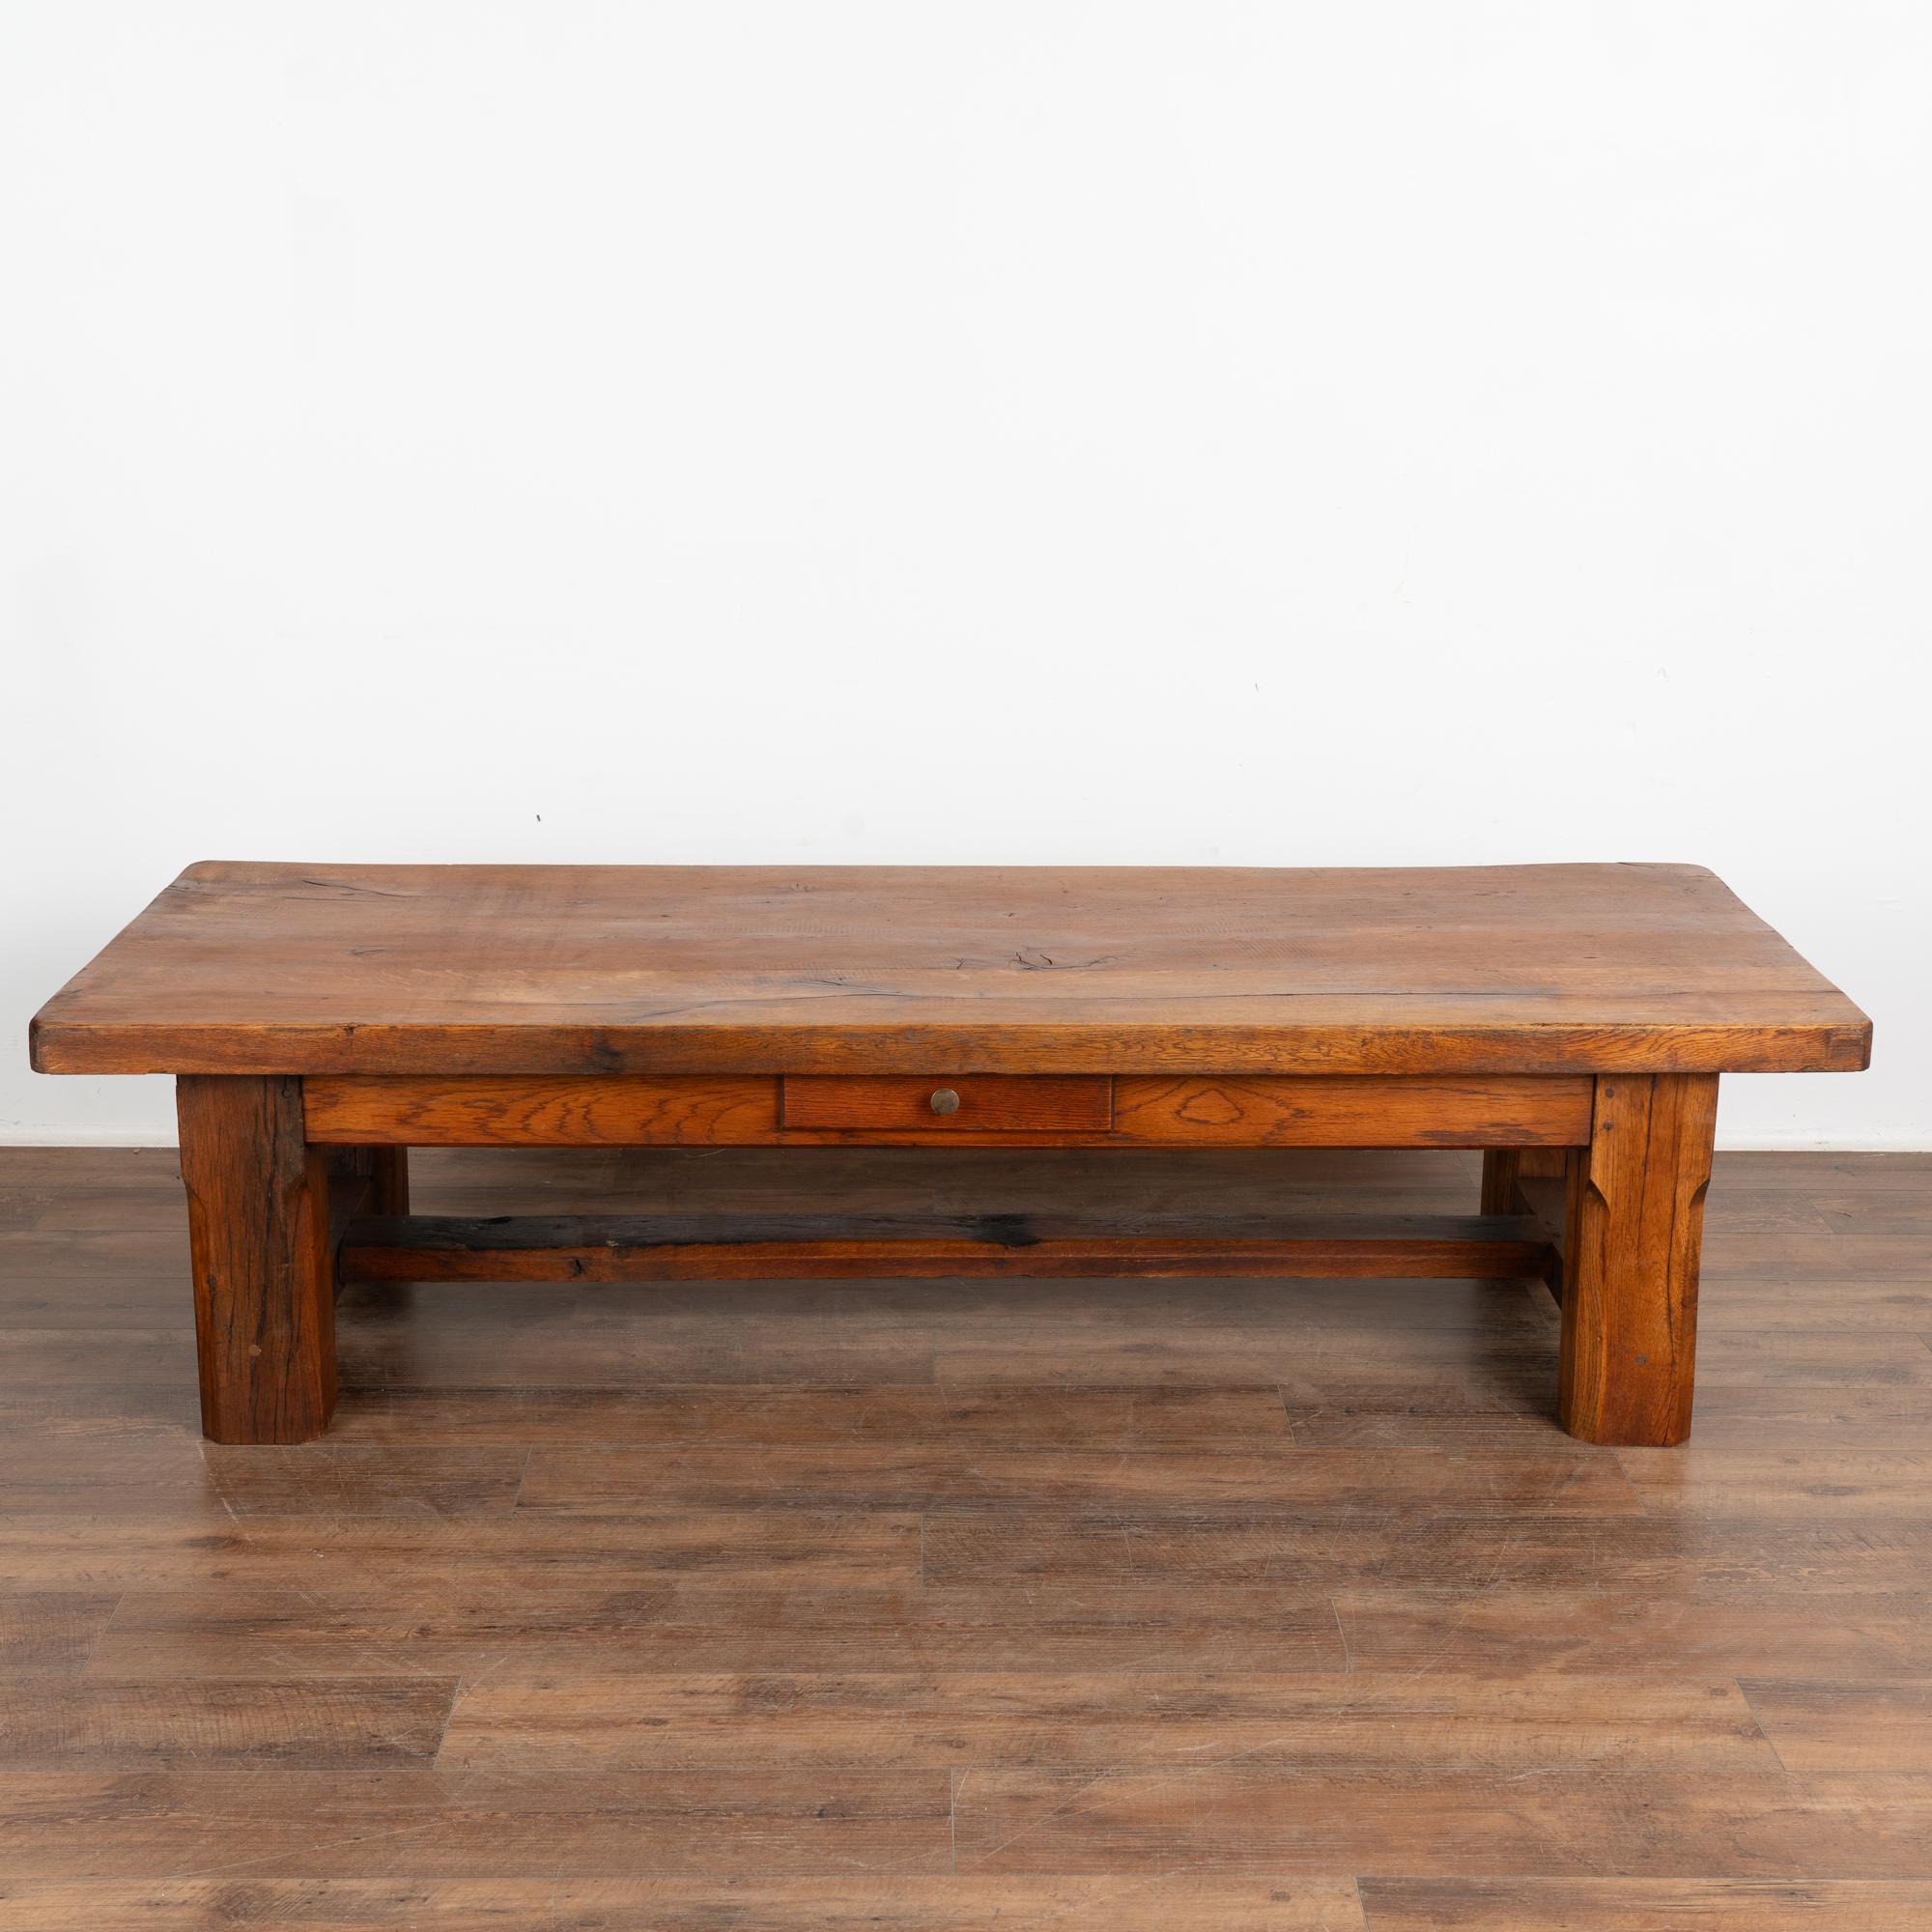 French Large Coffee Table With Single Drawer from France, circa 1900 For Sale